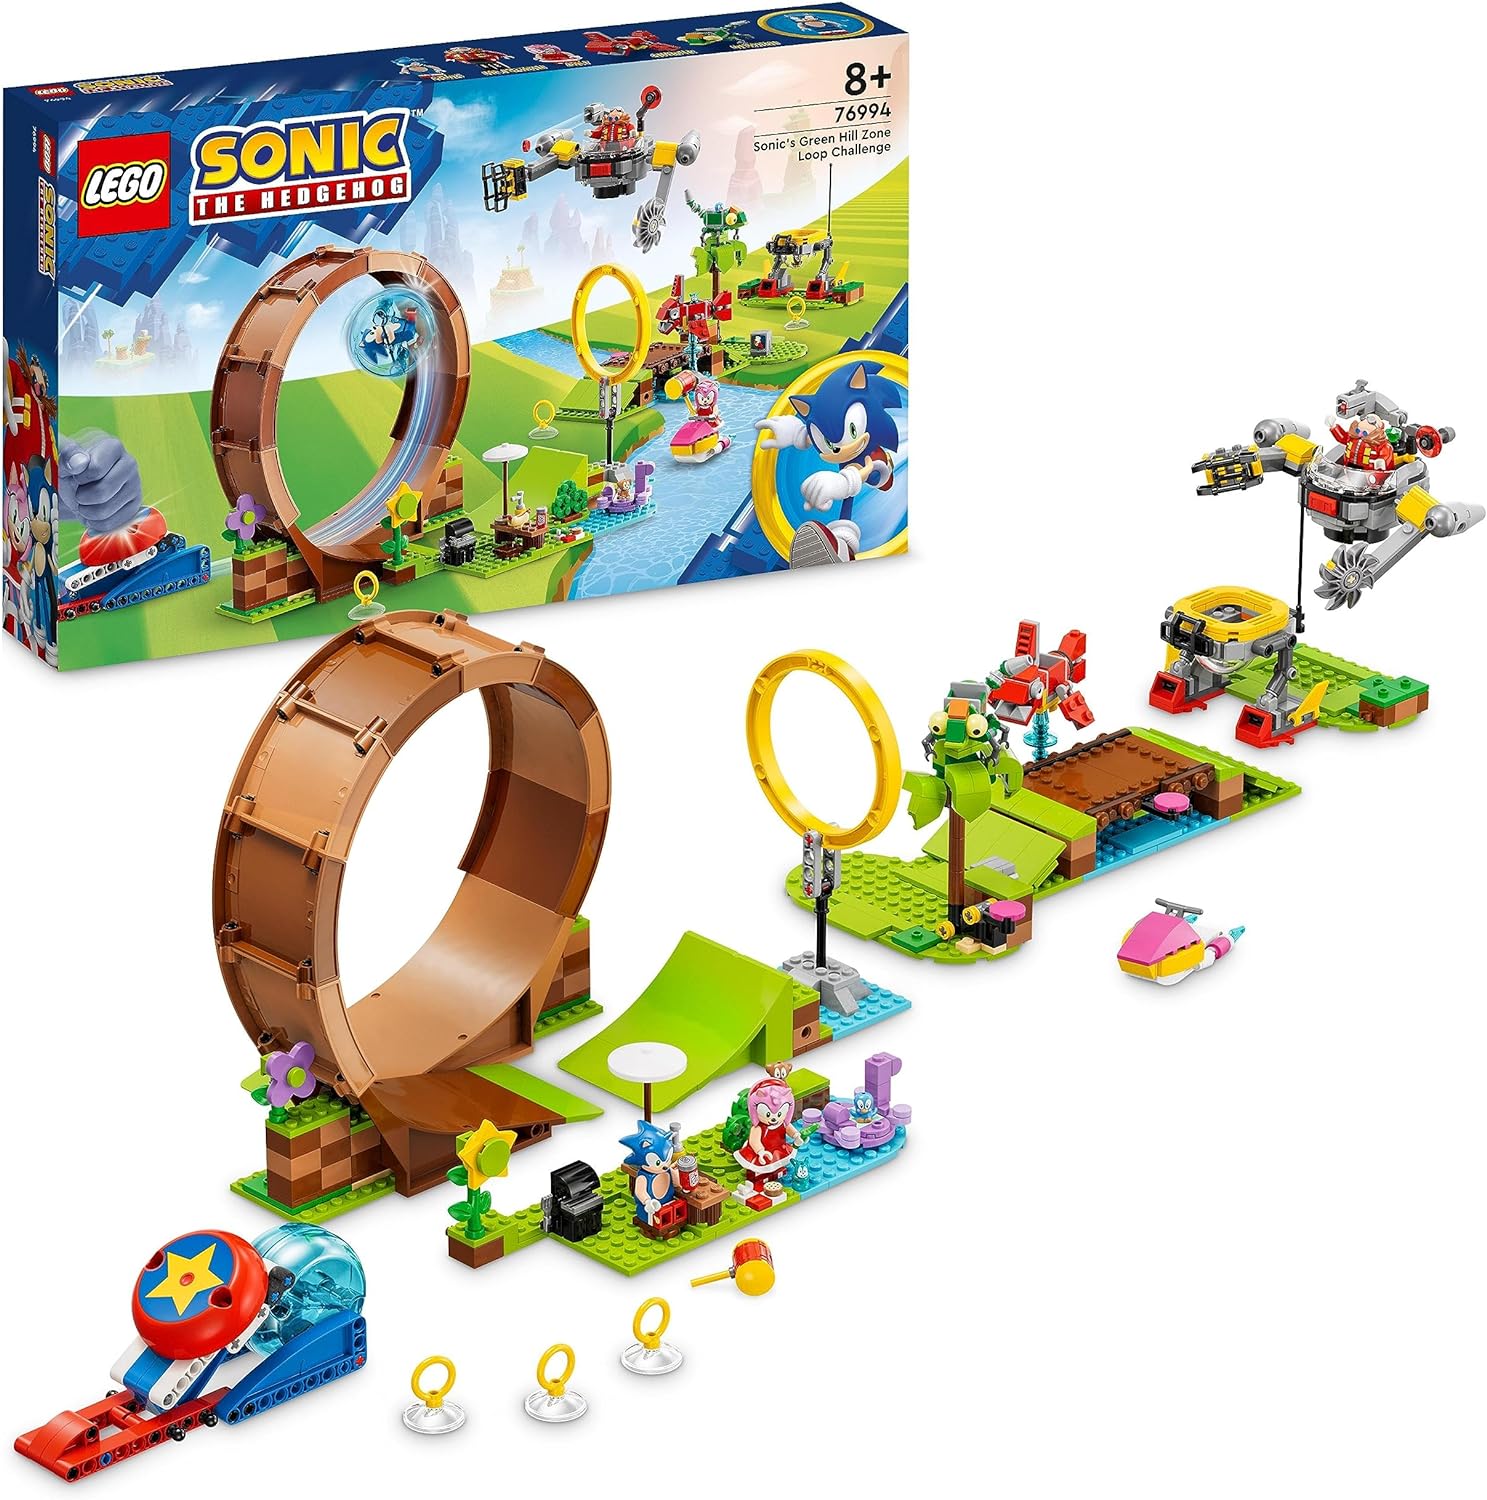 LEGO 76994 Sonic the Hedgehog Sonics Looping Challenge In The Green Hill Zone, Buildable Toy for Kids, Boys and Girls With 9 Characters Including Dr. Eggman and Amy